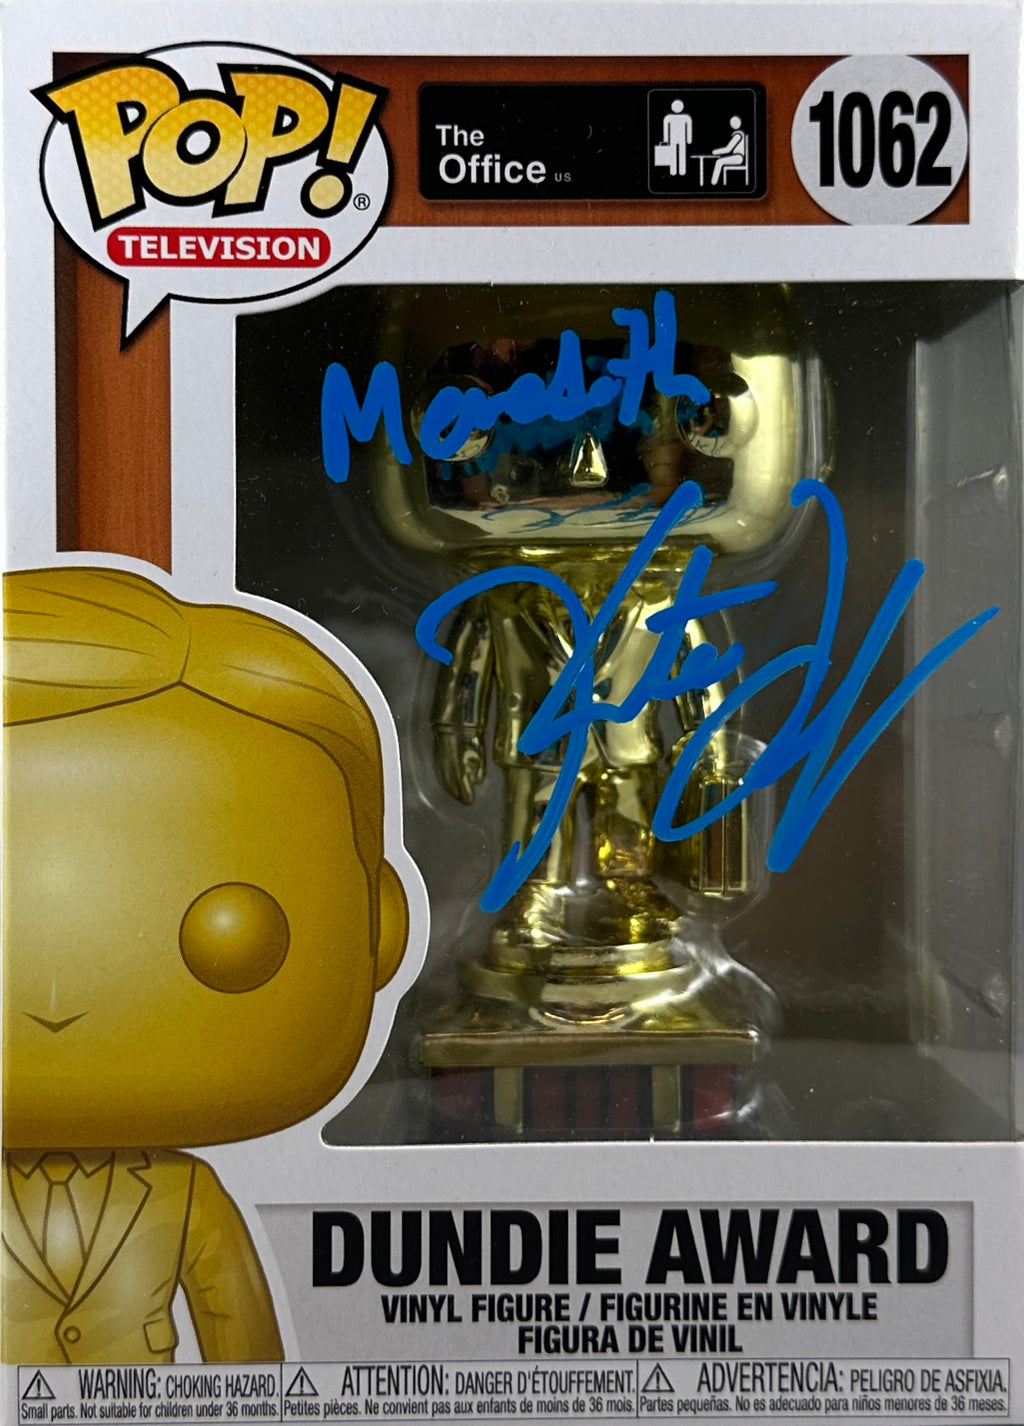 Kate Flannery autographed signed inscribed Funko Pop The Office JSA COA Meredith